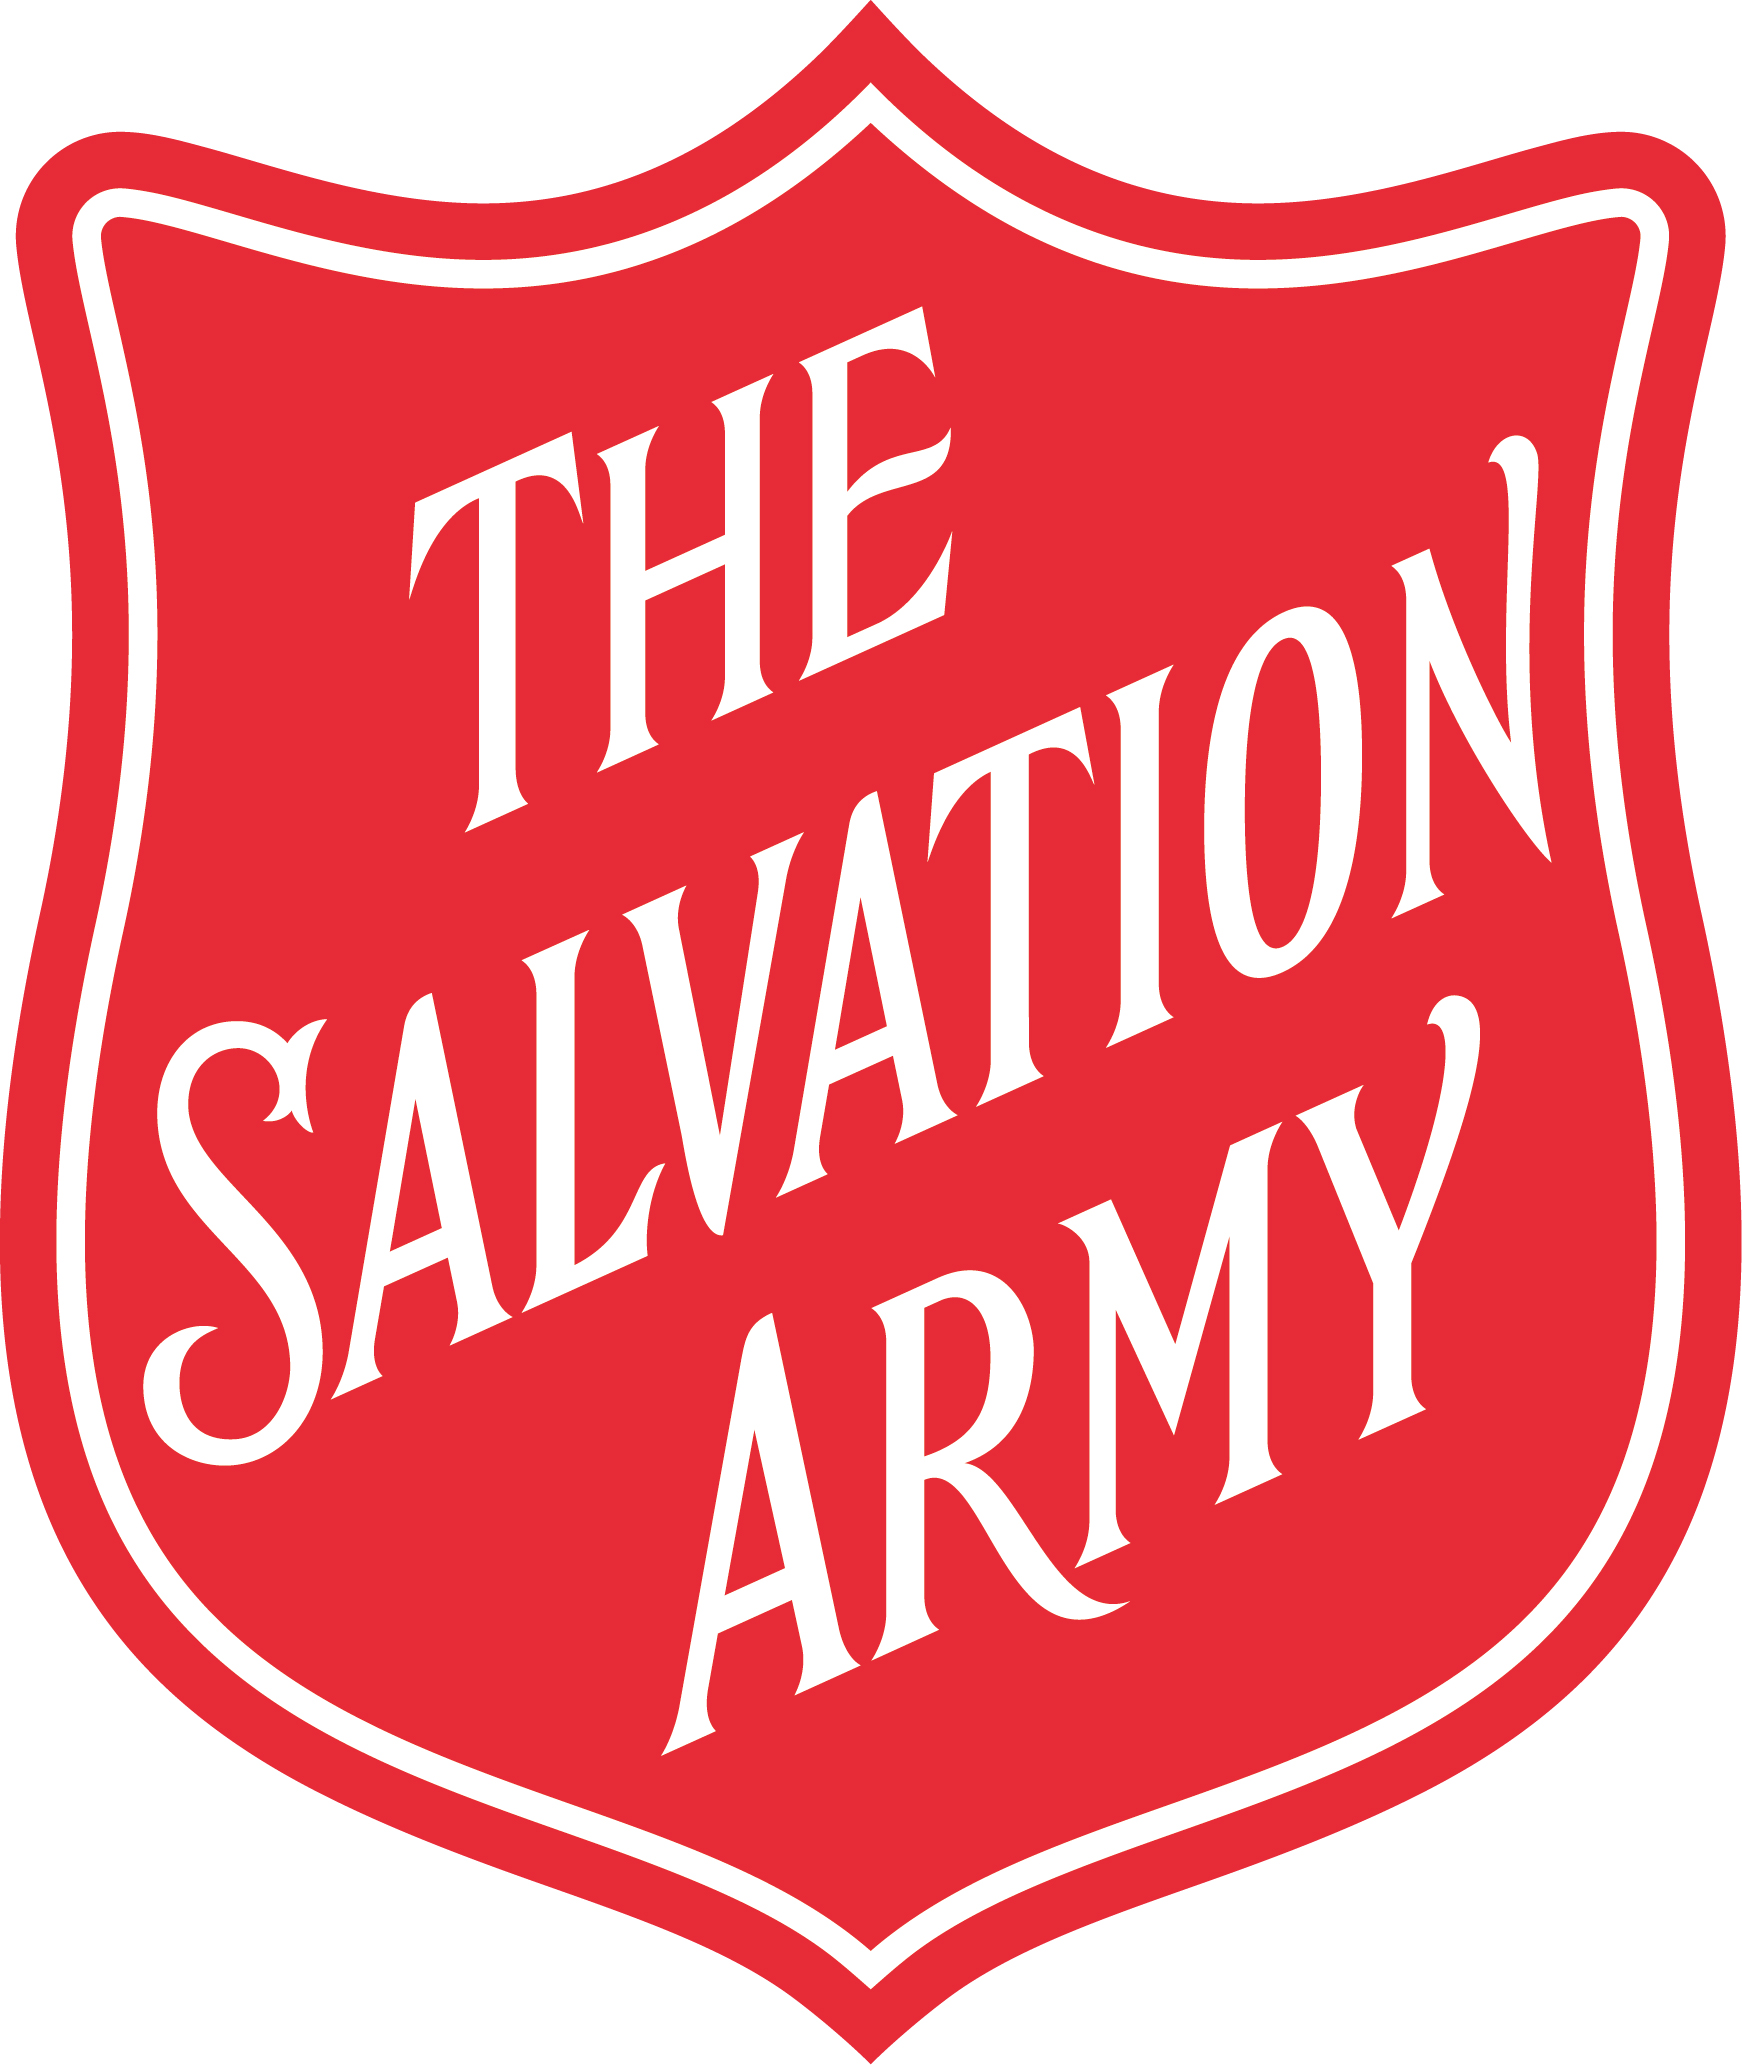 Salvation Army: Councils need government help to break homeless housing 'bottleneck'